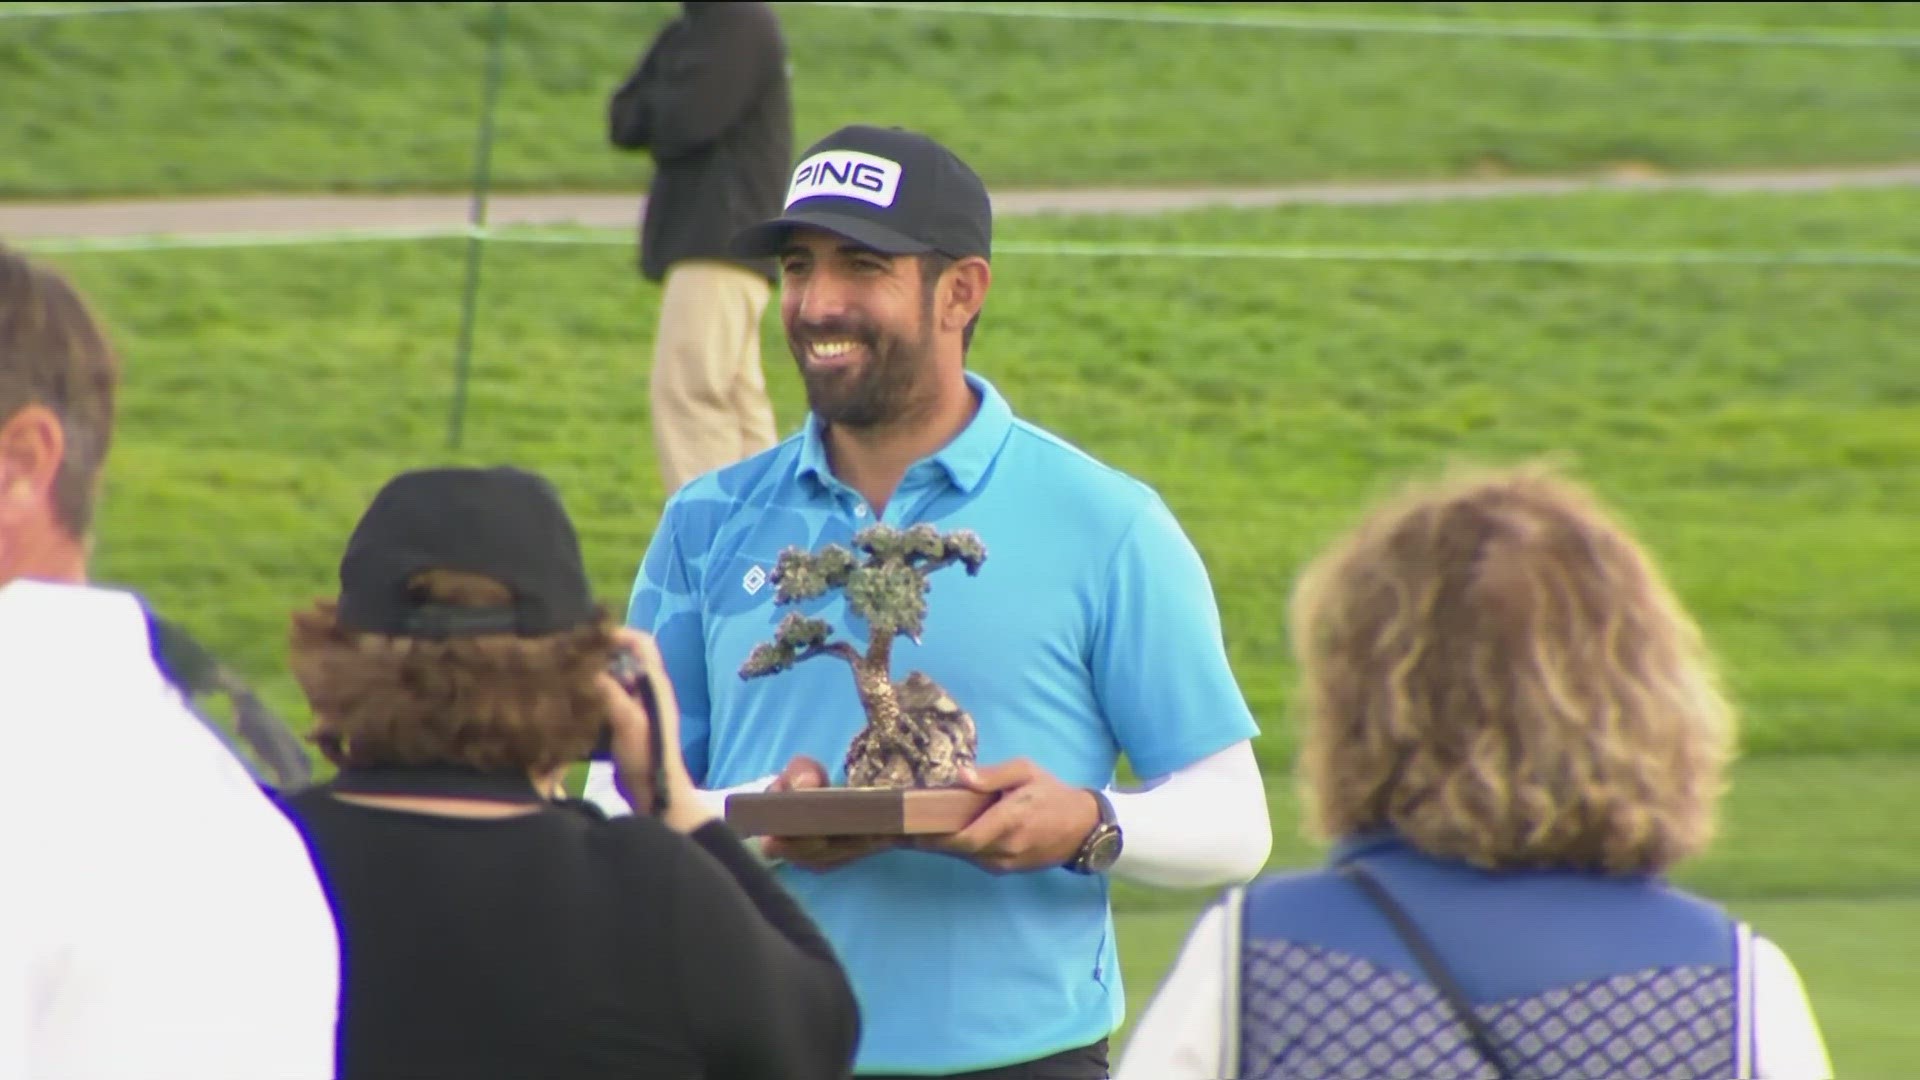 Pavon made an 8-foot putt for a dramatic birdie on No. 18 at Torrey Pines South for a one-shot victory in the Farmers Insurance Open on Saturday.